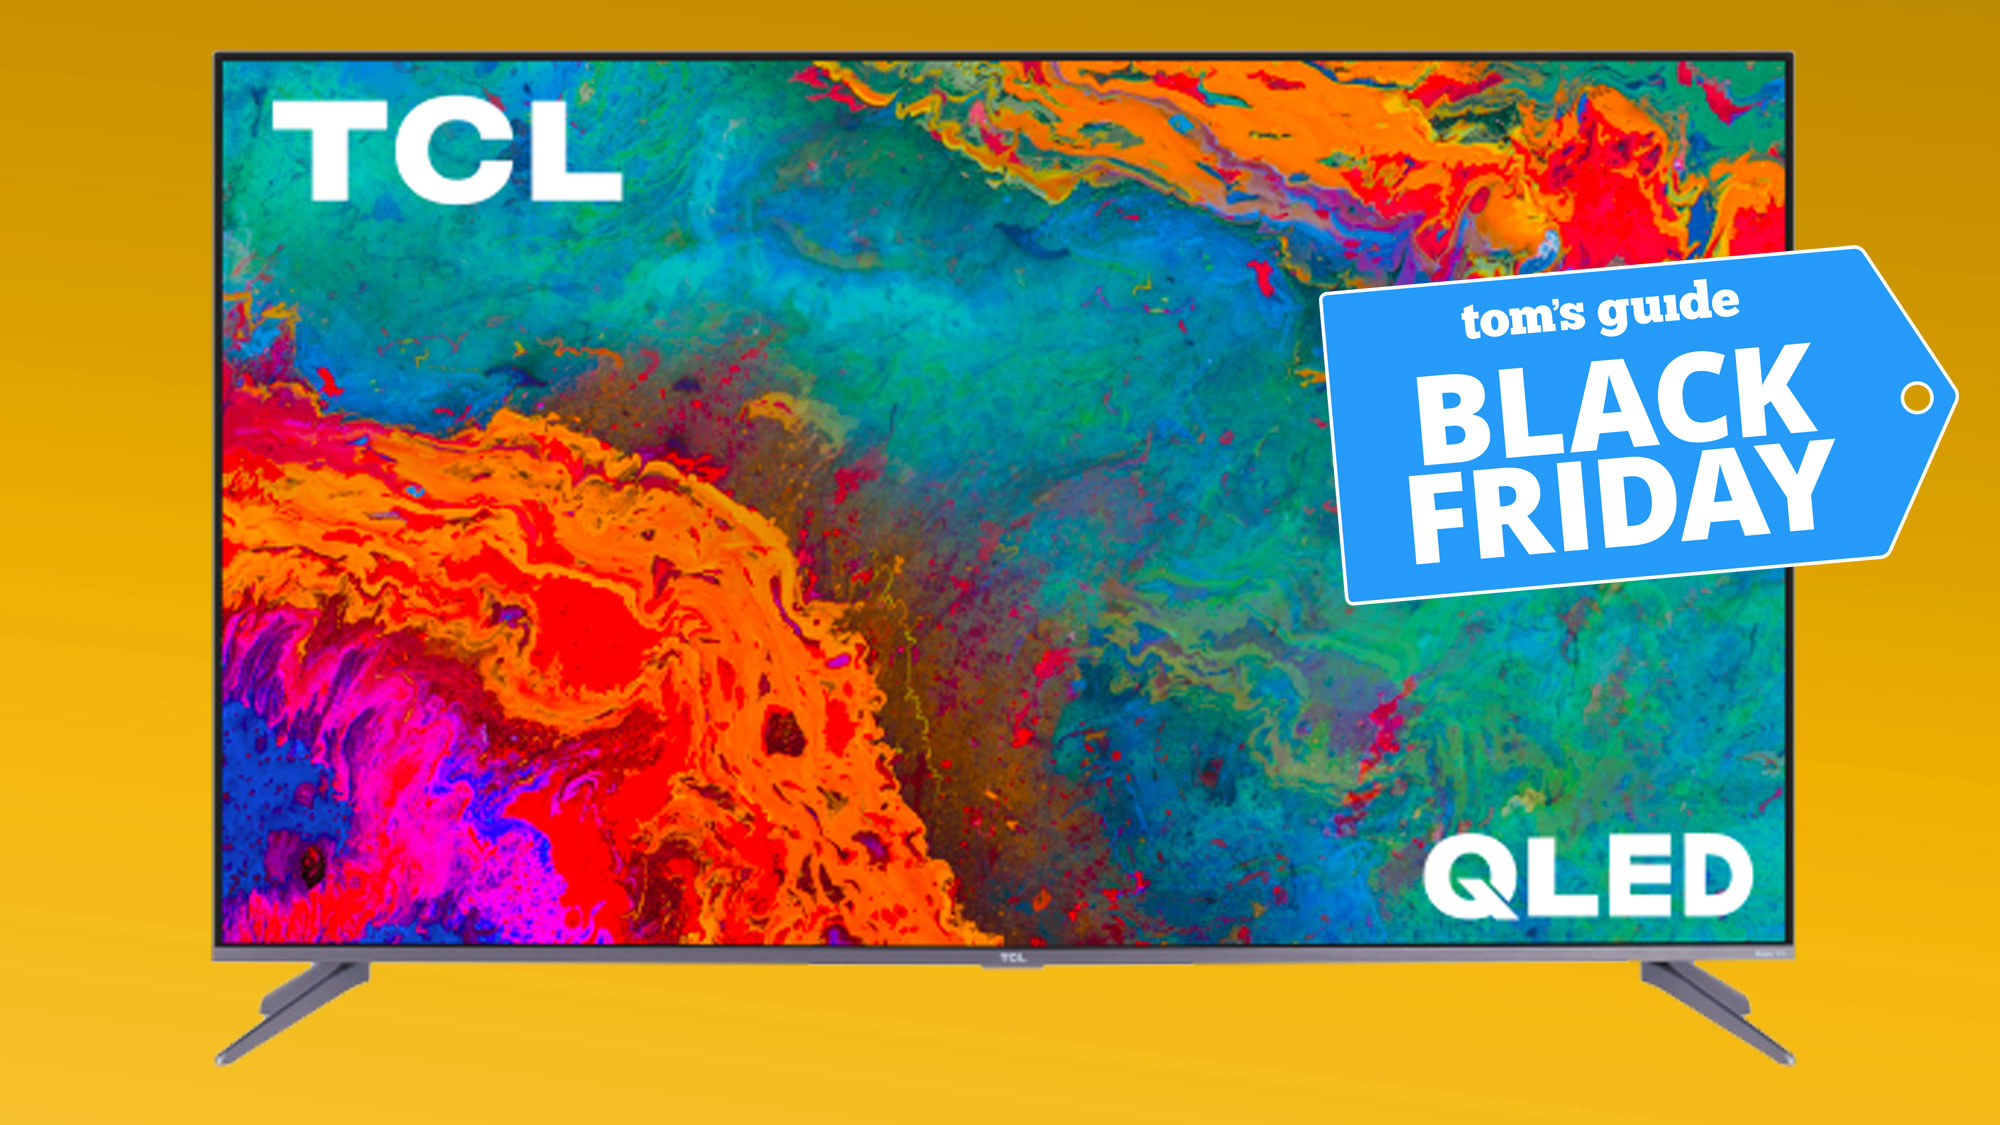 This amazing Black Friday TV deal gives you a 55inch QLED TV for just